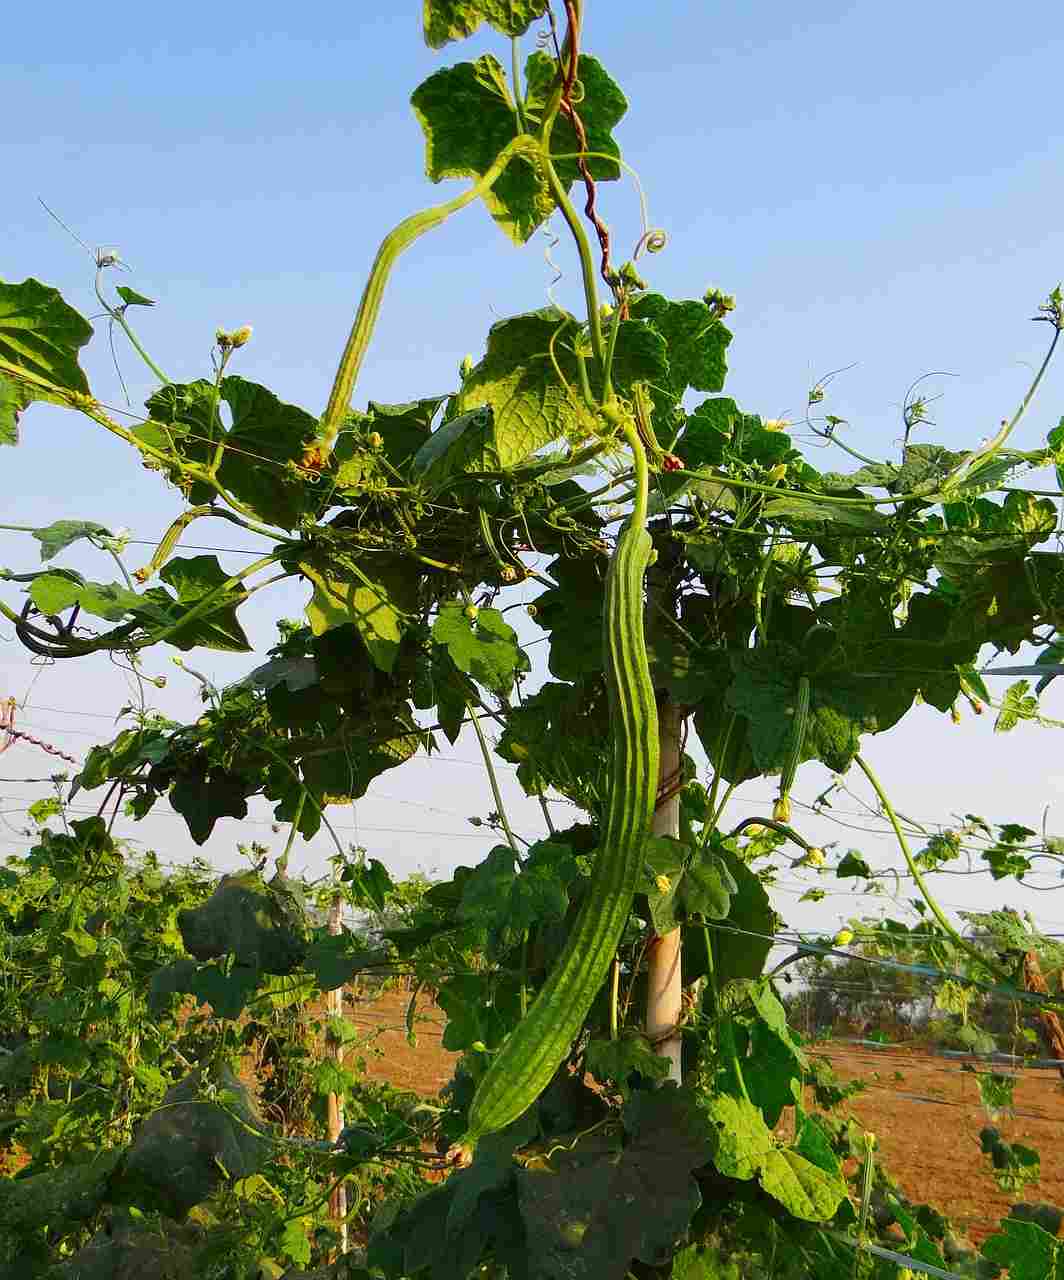 Growing Conditions of Ridge Gourd.